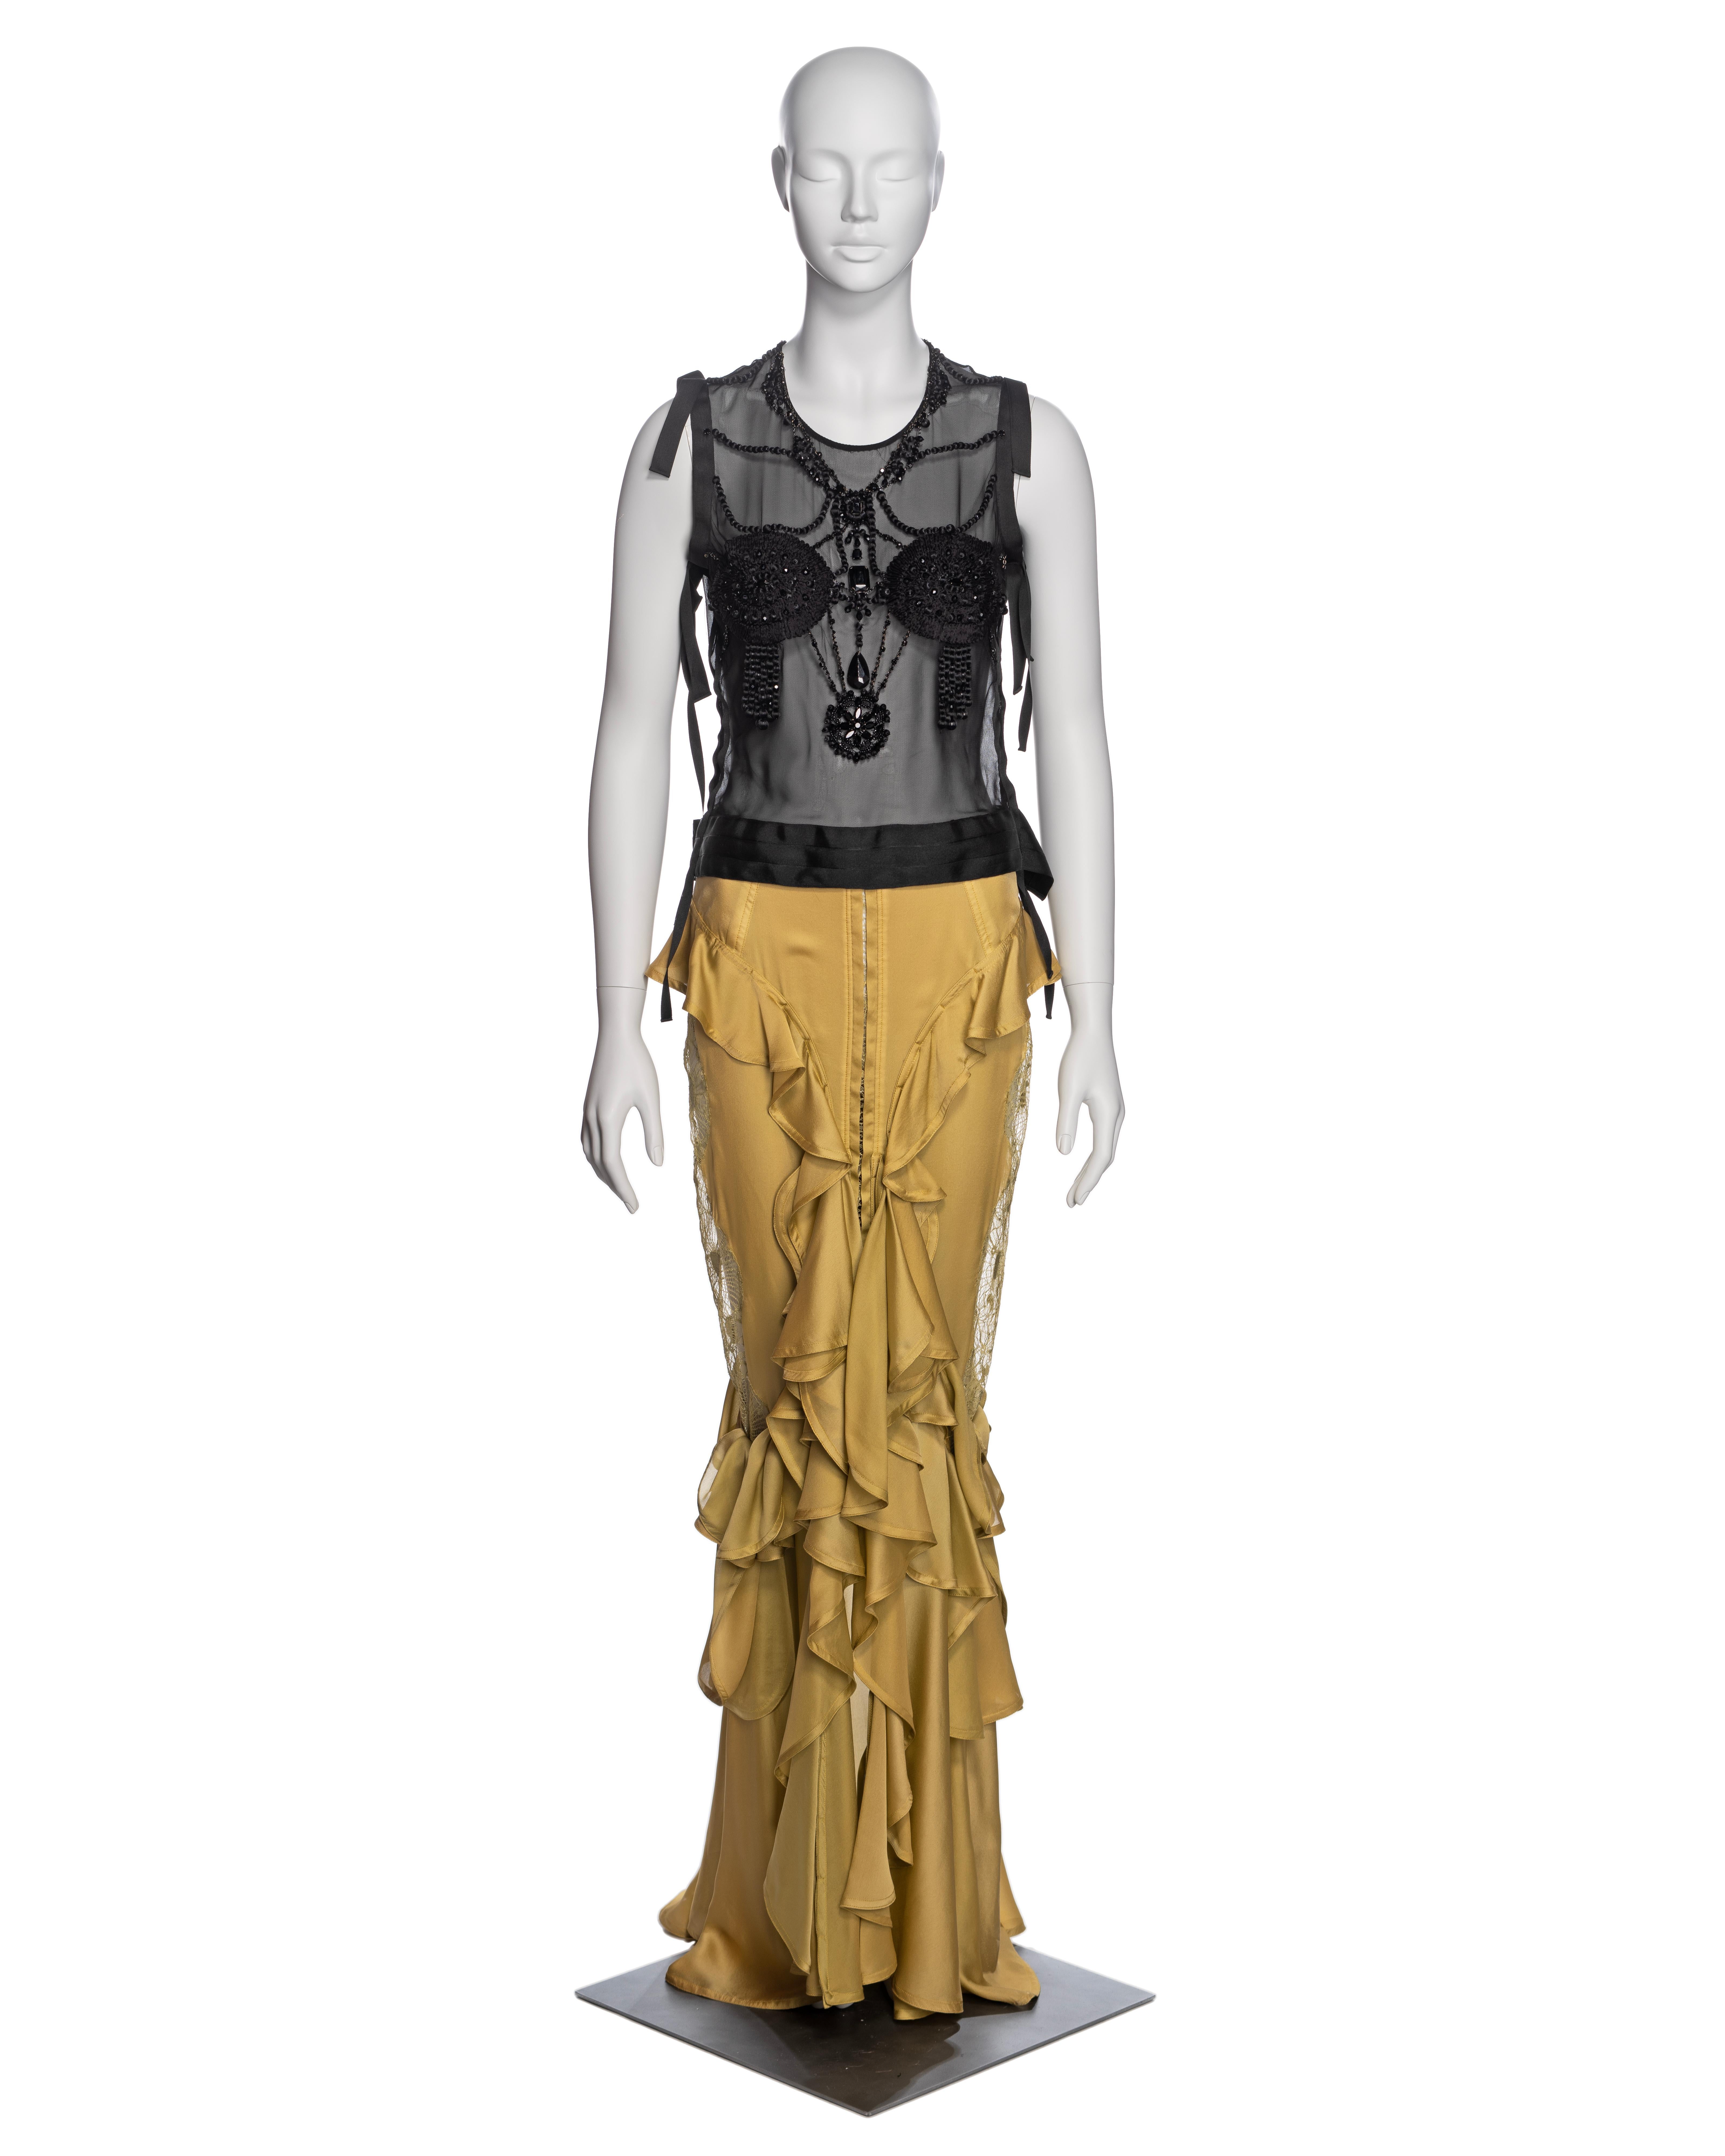 ▪ Brand: Yves Saint Laurent
▪ Creative Director: Tom Ford
▪ Collection: Fall-Winter 2003
▪ Fabric: Silk
▪ Details: The top in a black silk net with grosgrain ribbon trim, adorned with silk thread beads, crystals and seed beads. The Skirt in a